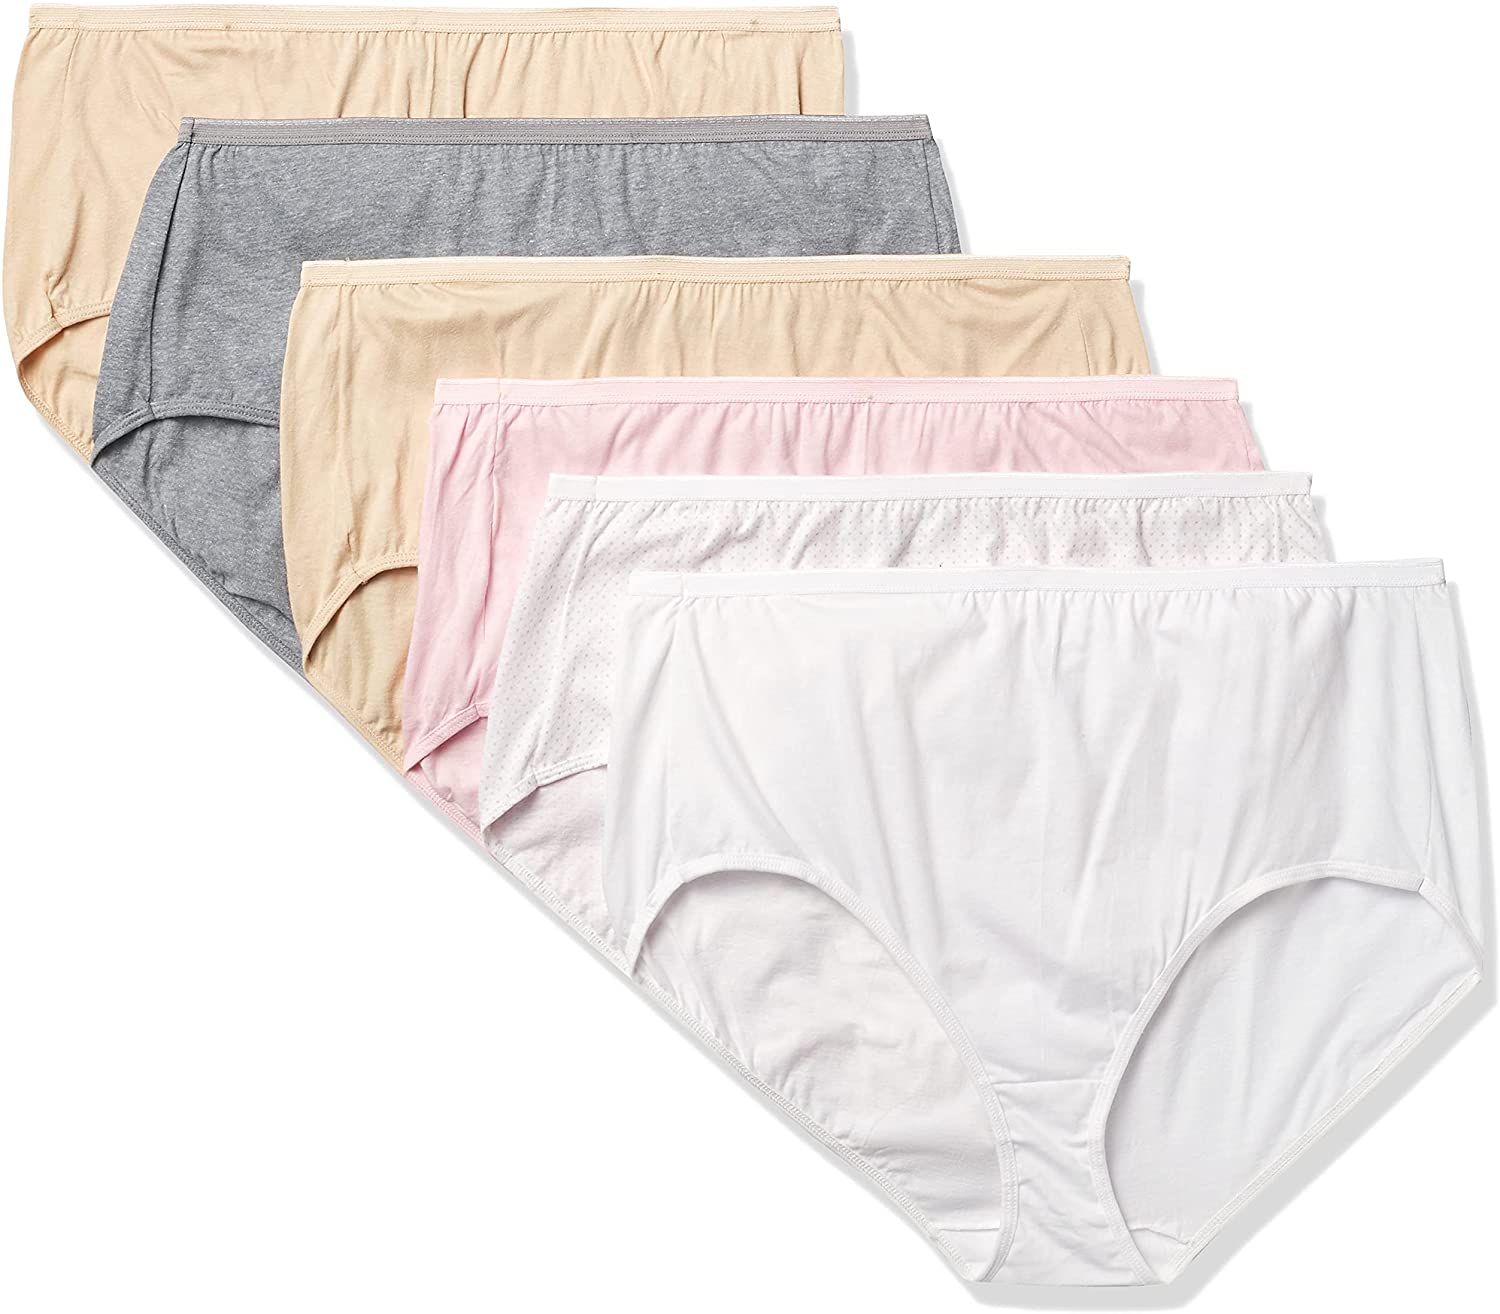 Just My Size Women's Plus Size Cool Comfort Cotton Brief 10-Pack, Assorted,  12